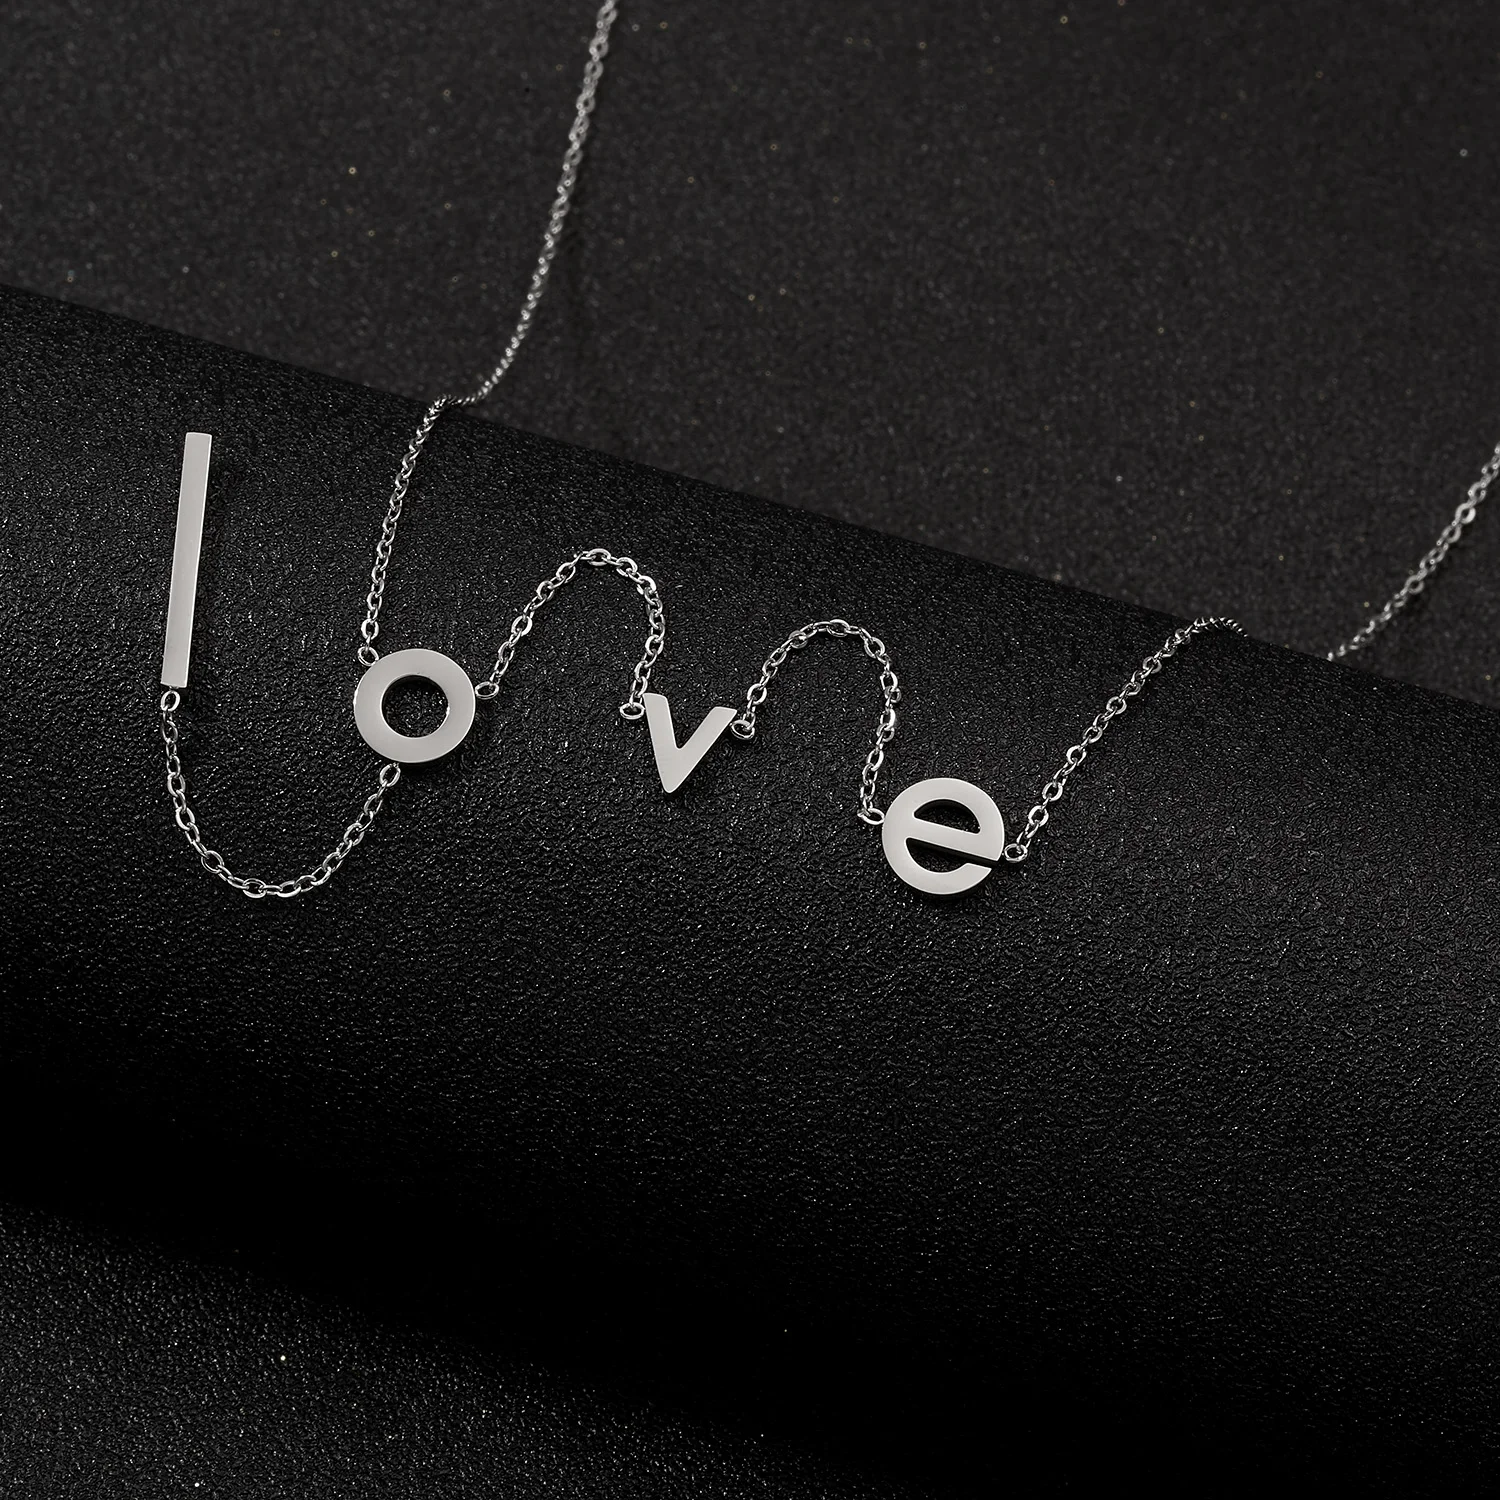 Aliexpress - Elegant Alphabet LOVE Pendant Necklace For Women Silver Color Stainless Steel Letter Clavicle Chain Party Wedding Jewelry